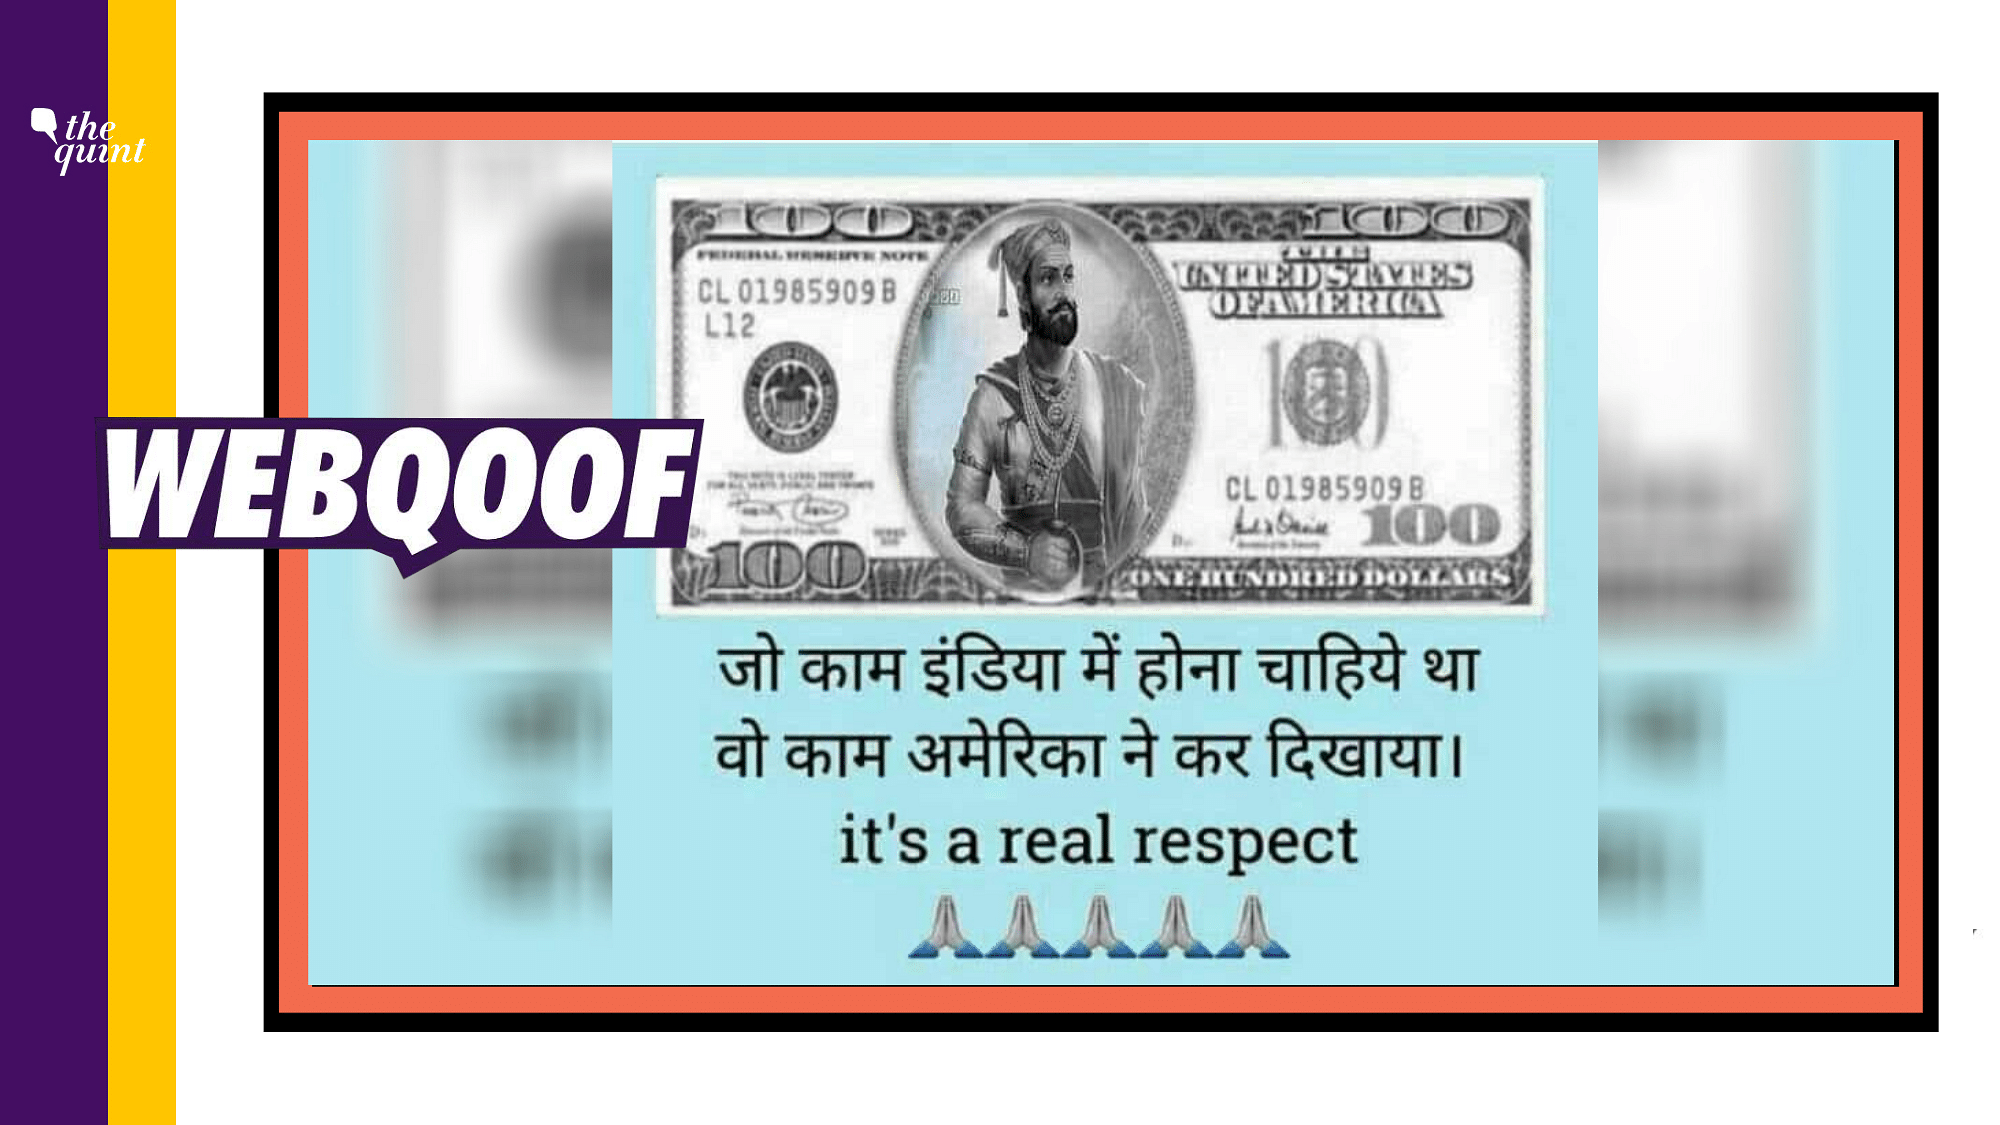 A fake $100 currency note is viral with the false claim that US declared 19 February as ‘World Chhatrapati Day.’